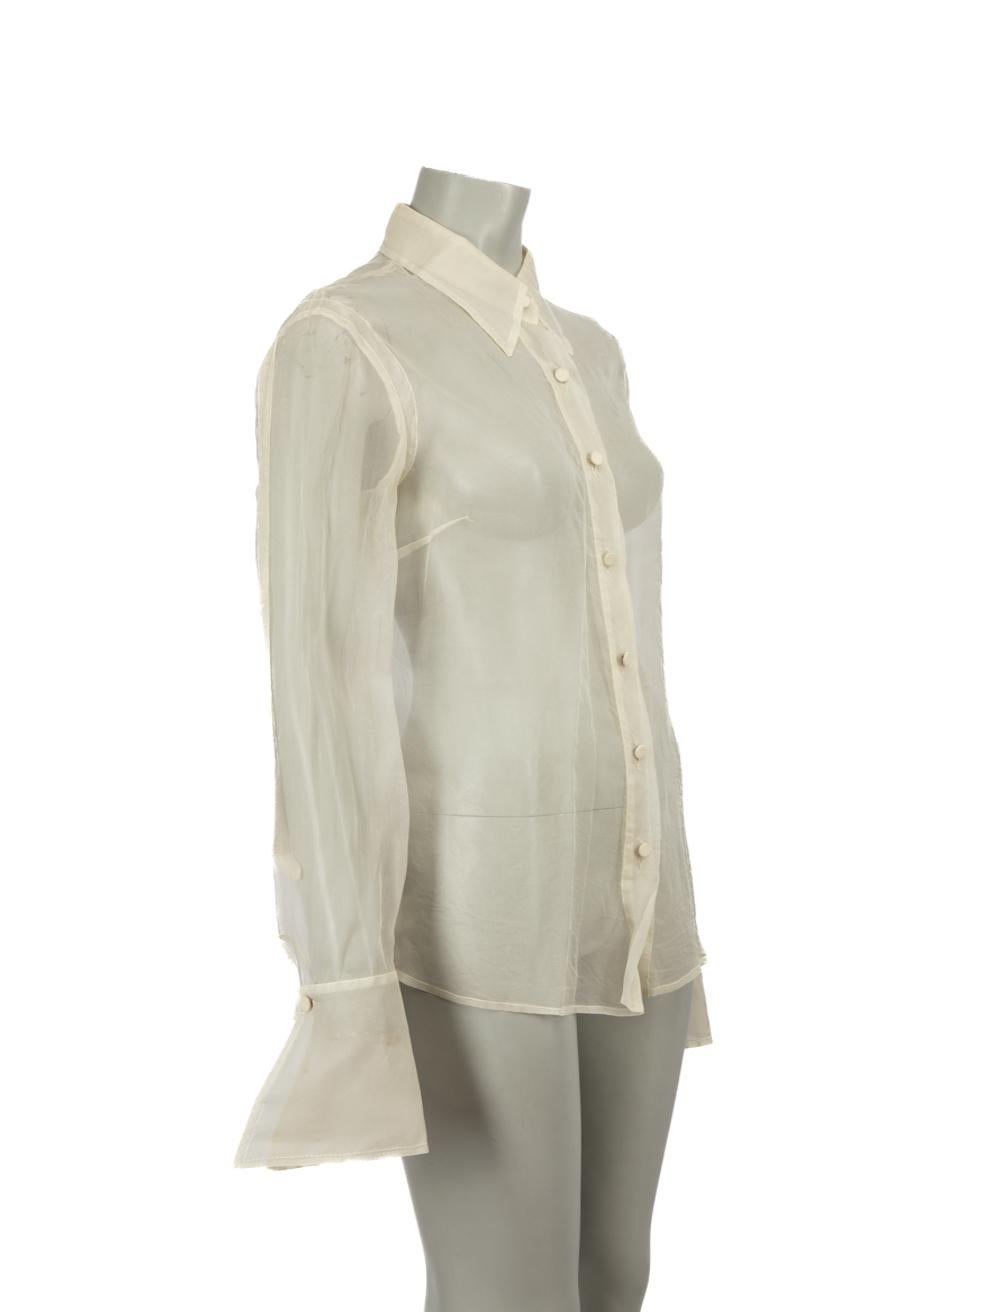 CONDITION is Very good. Minimal wear to shirt is evident. Minimal wear to seams with some minor pulls to the weave under the arms and a discoloured mark at the right cuff on this used Gianfranco Ferré designer resale